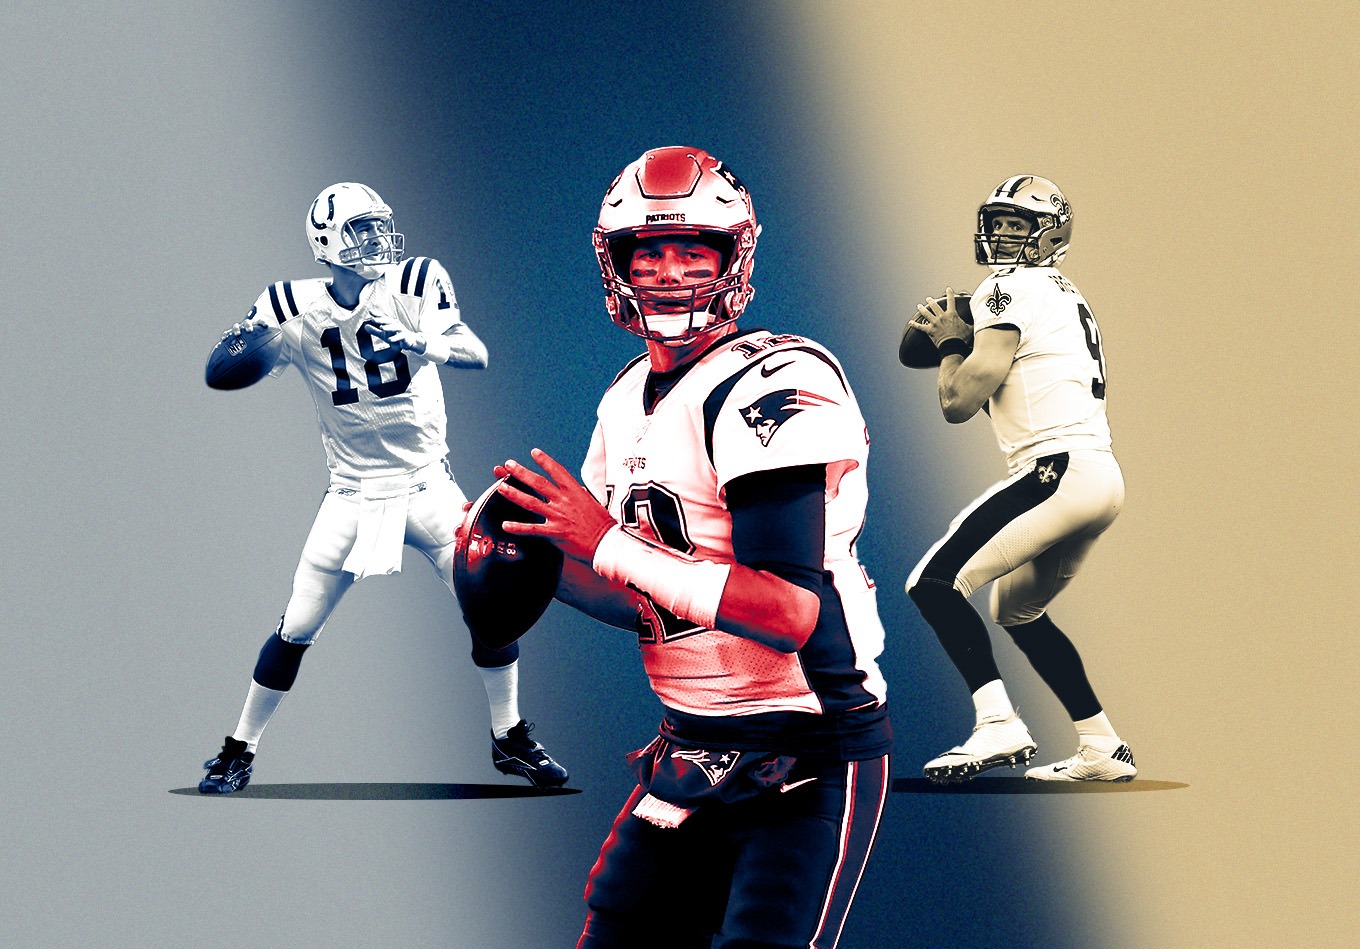 NFL All-Time Passing Yards: Who Tops This List of Legends?